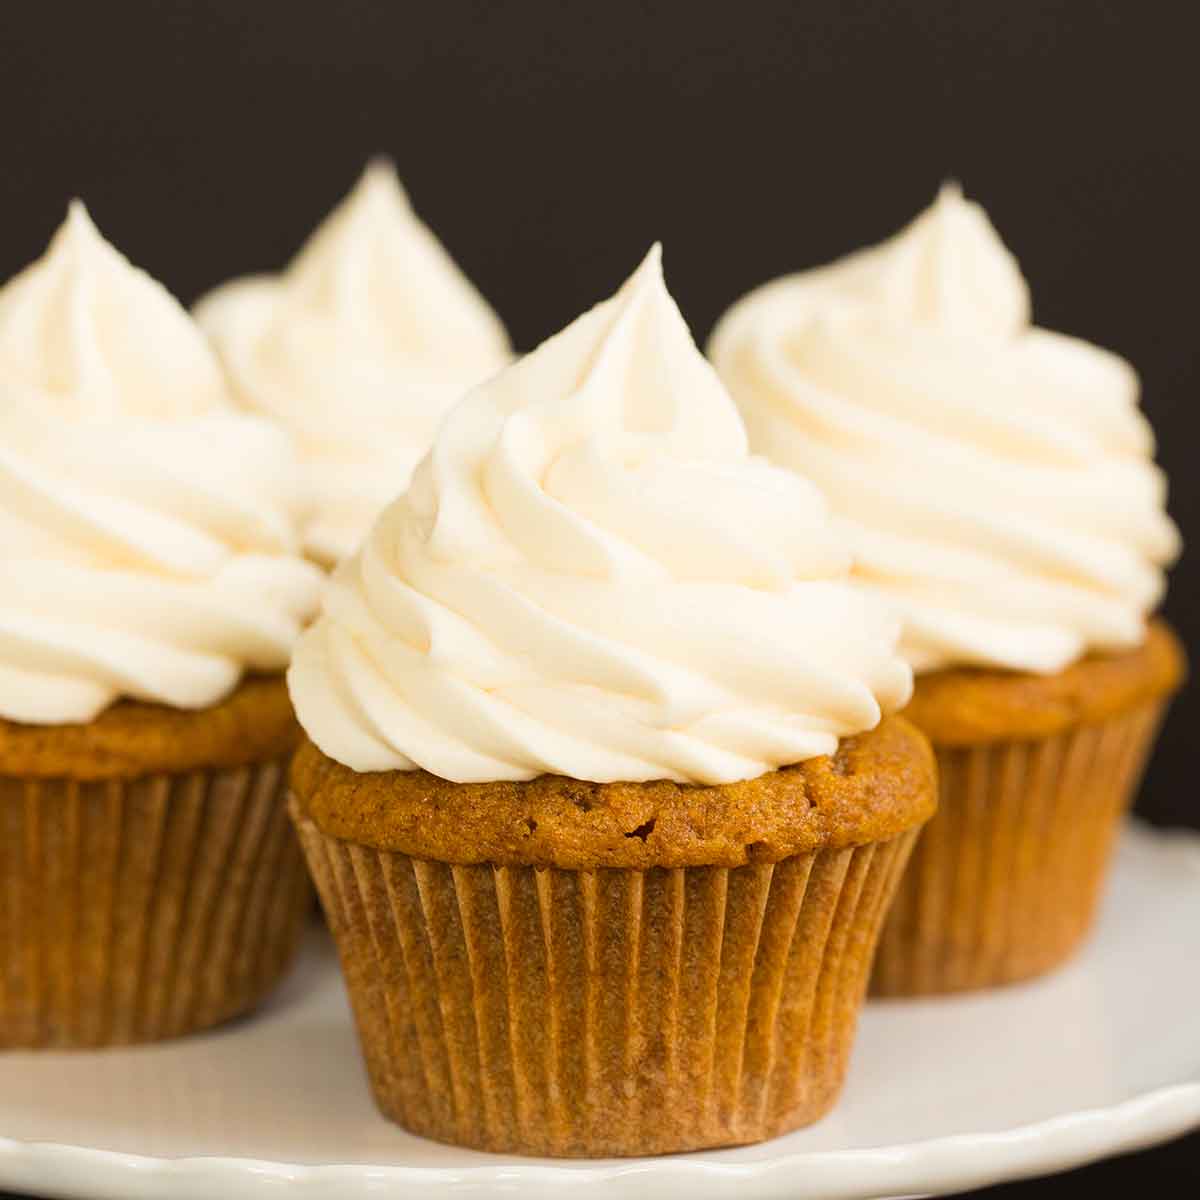 Pumpkin cupcakes topped with swirls of cream cheese frosting on a white serving plate.